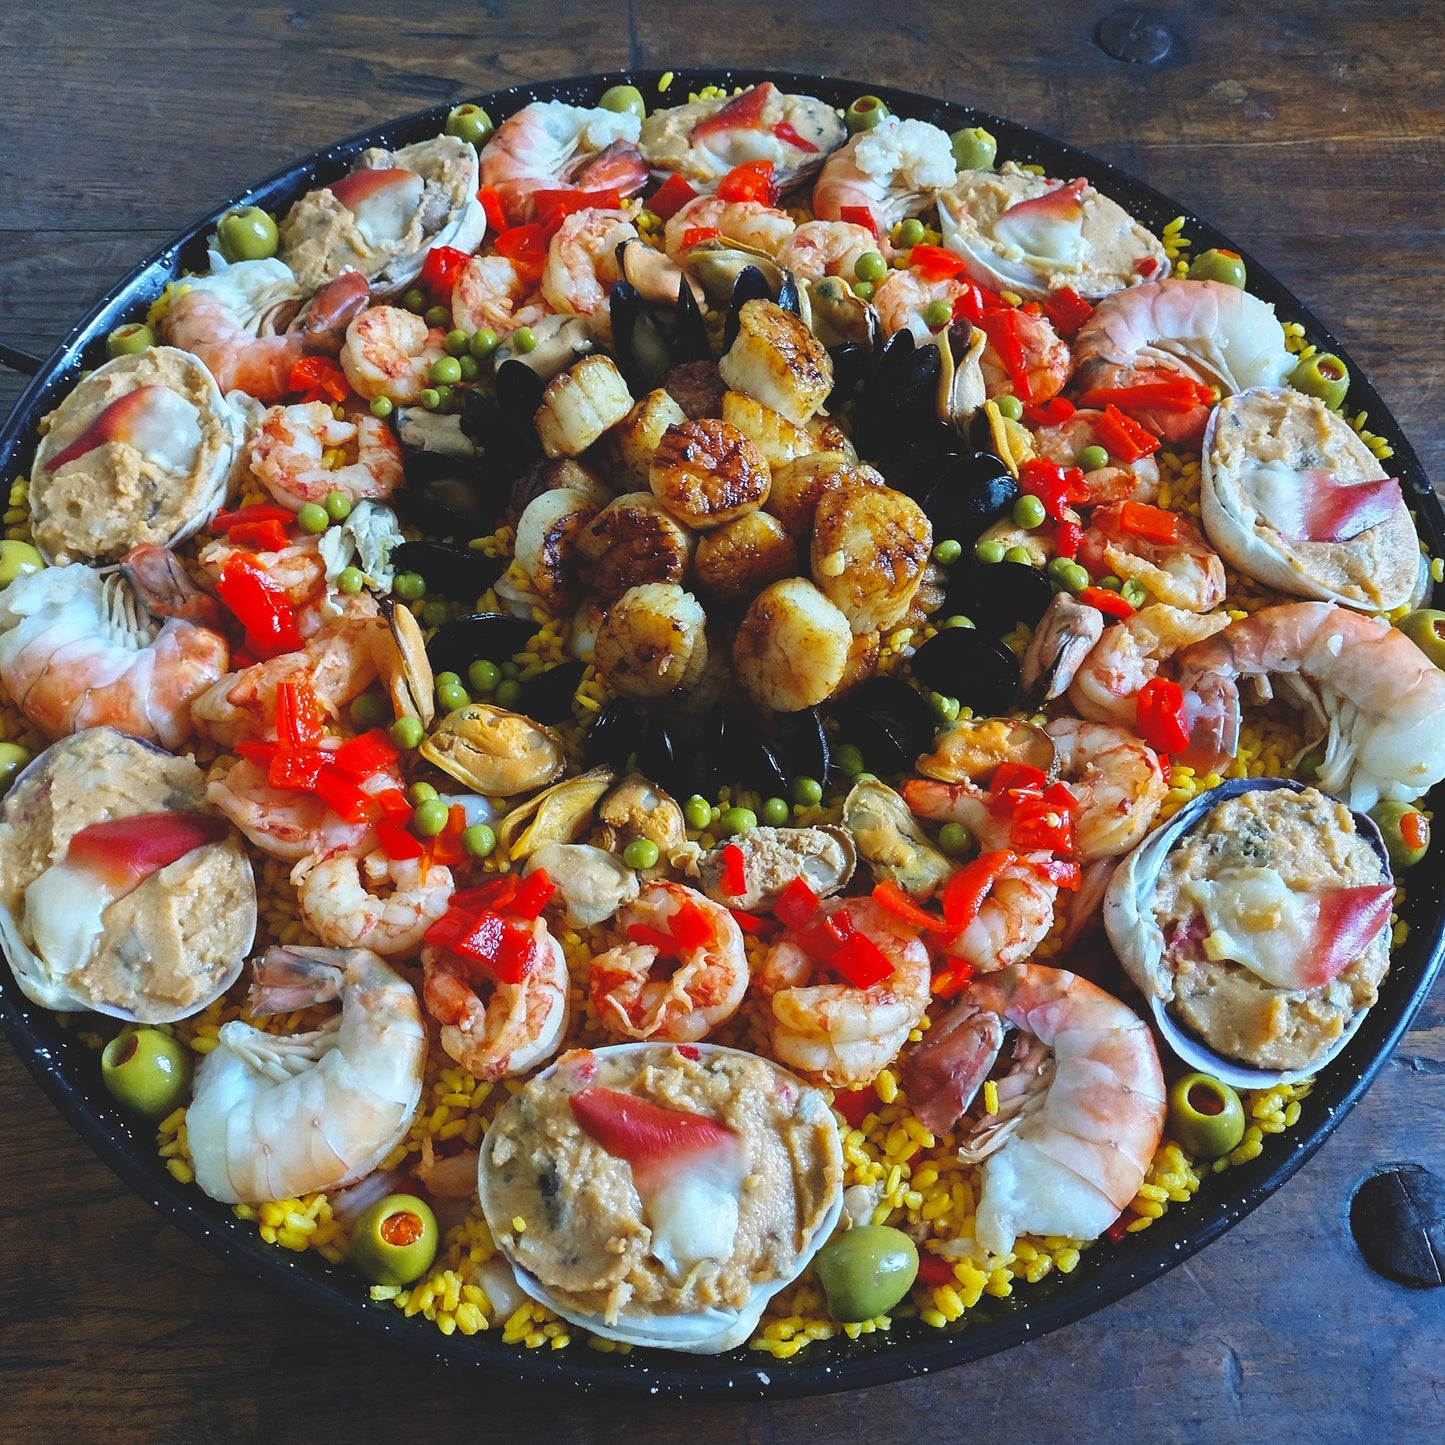 Deluxe paella. Set of six for 75 guests. Paella 6. Hand-stuffed Cherrystone clams with sushi grade hokkigai surf clams, blue mussels, calamari, Key West pink shrimp, butter seared sea scallops.